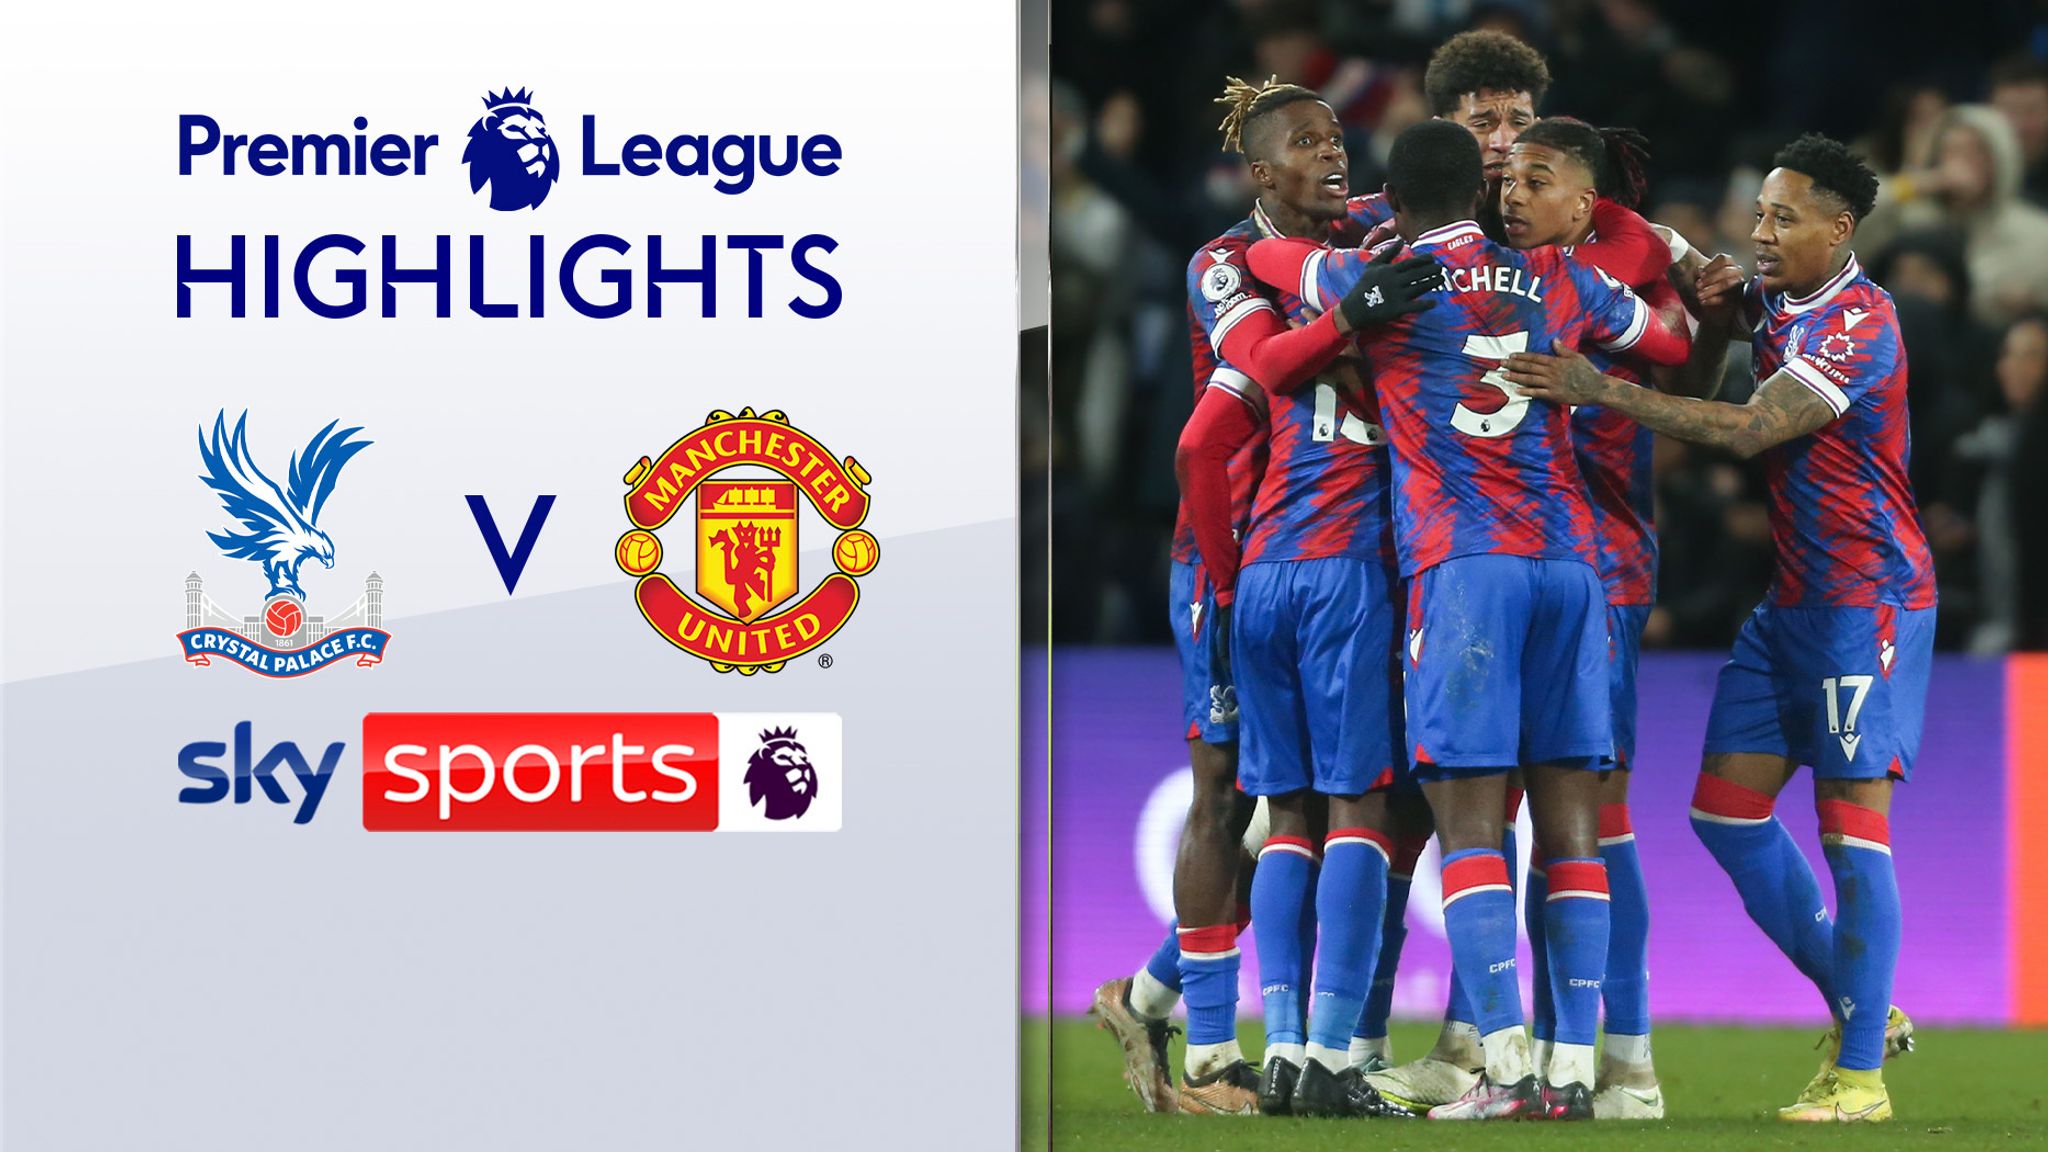 Crystal Palace 1-1 Manchester Utd Premier League highlights Video Watch TV Show Sky Sports